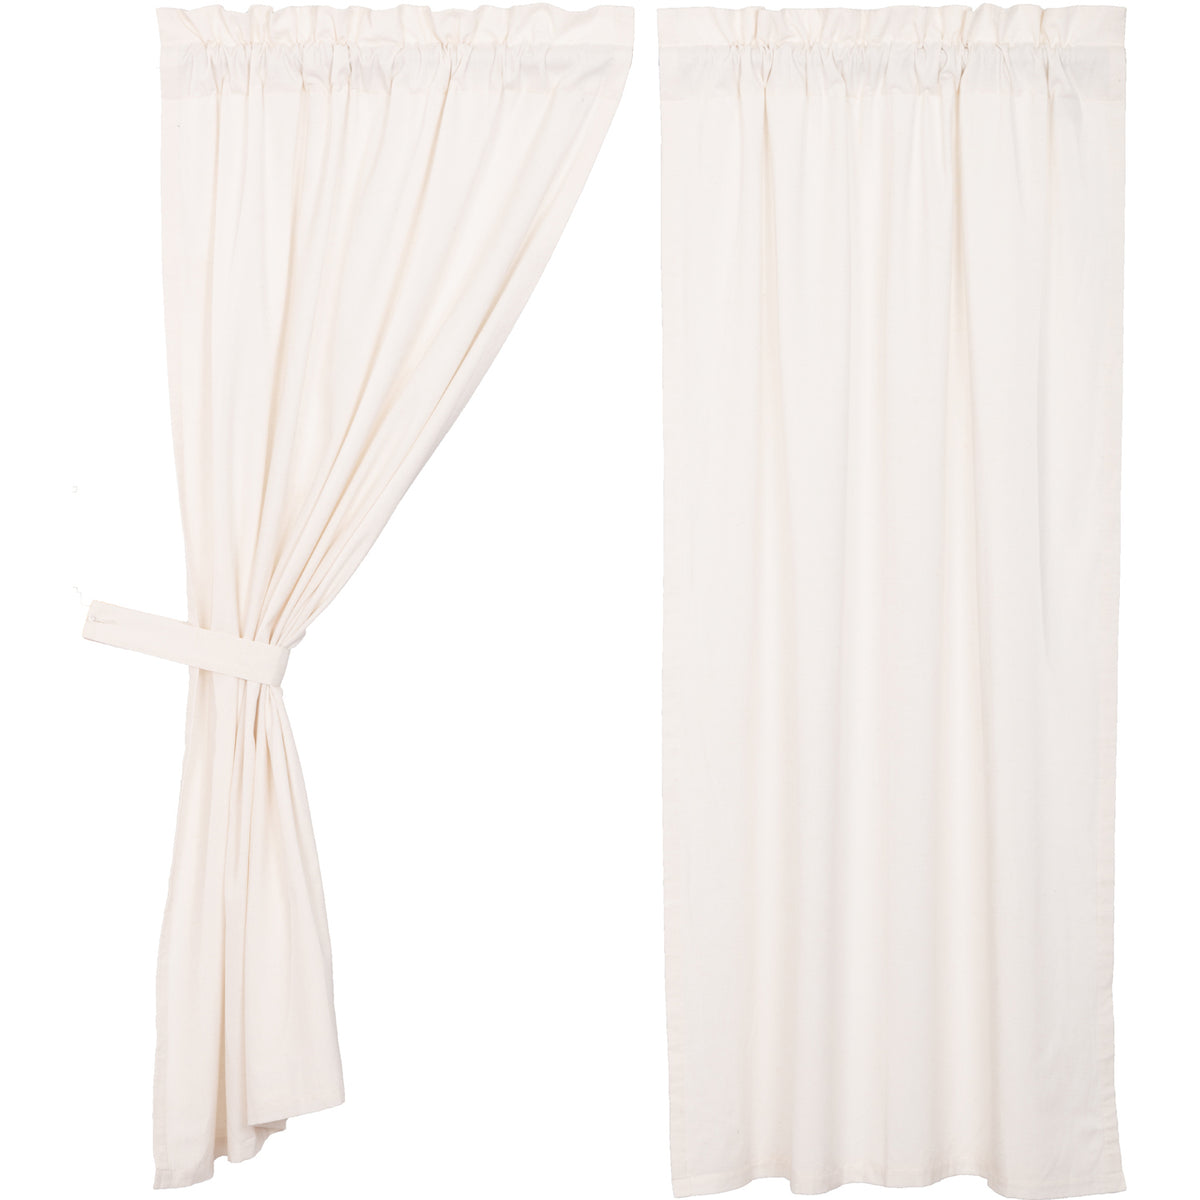 Simple Life Flax Antique White Short Panel Set of 2 63x36